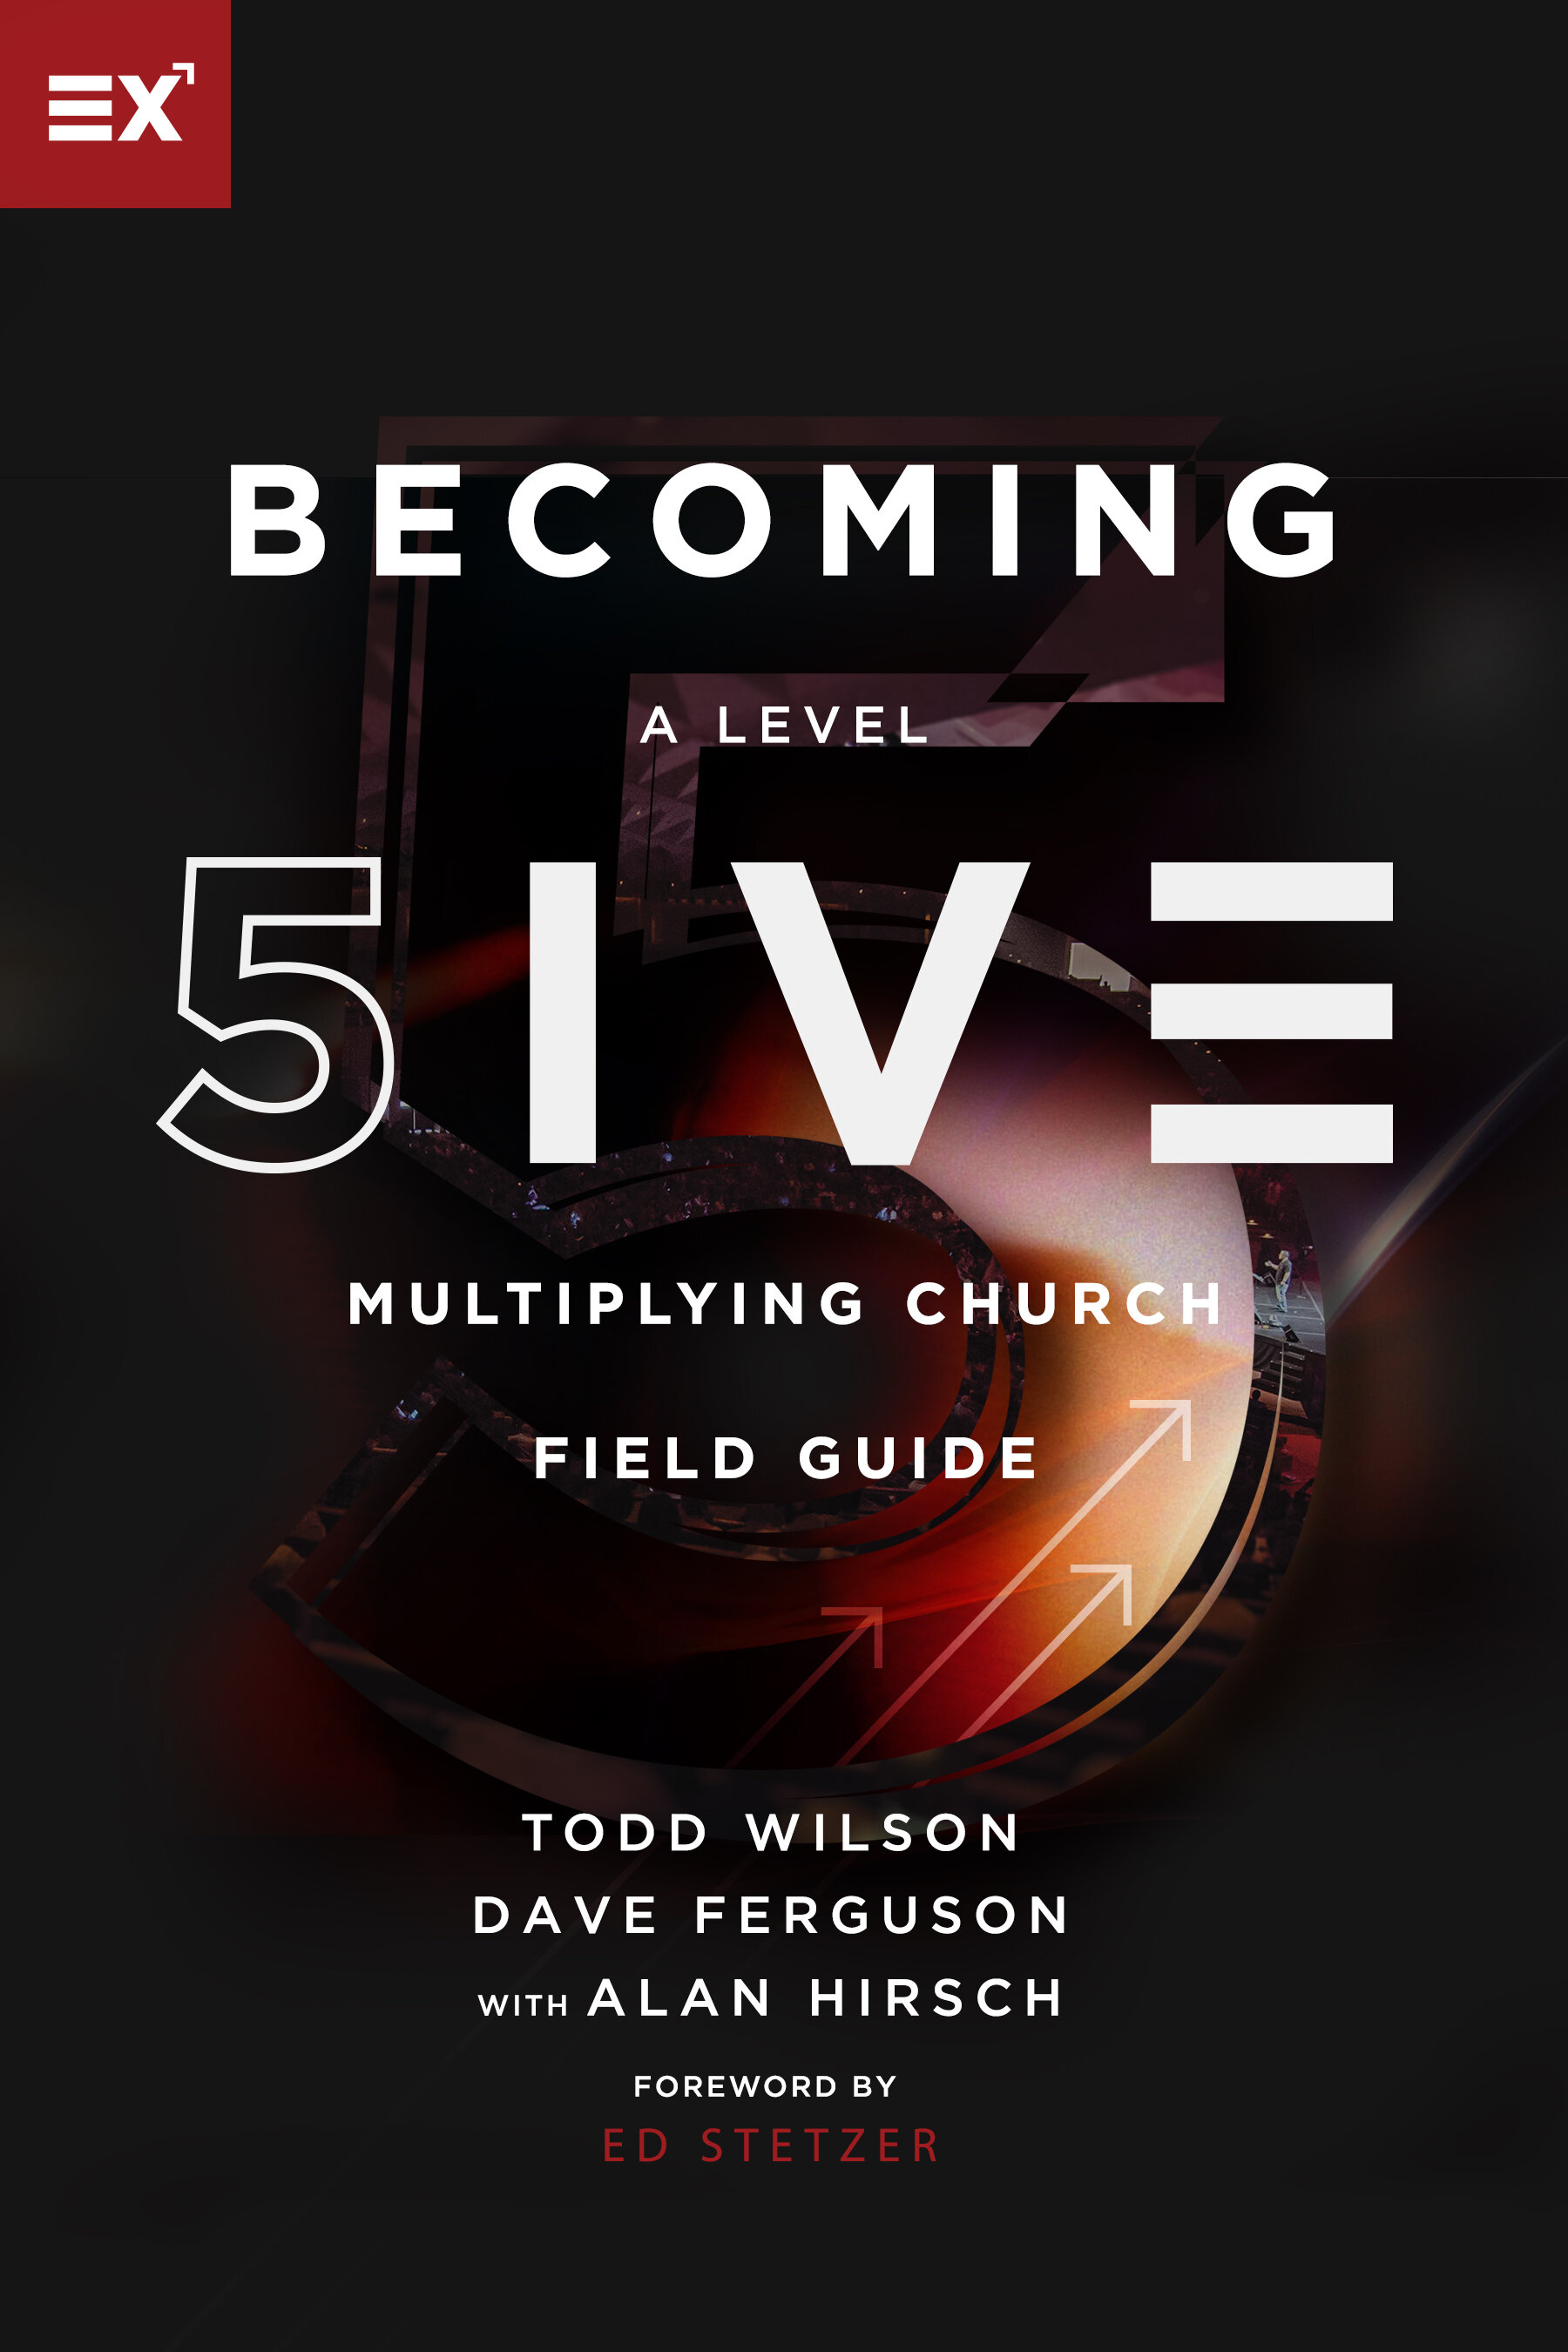 Becoming a Level Five Multiplying Church Field Guide